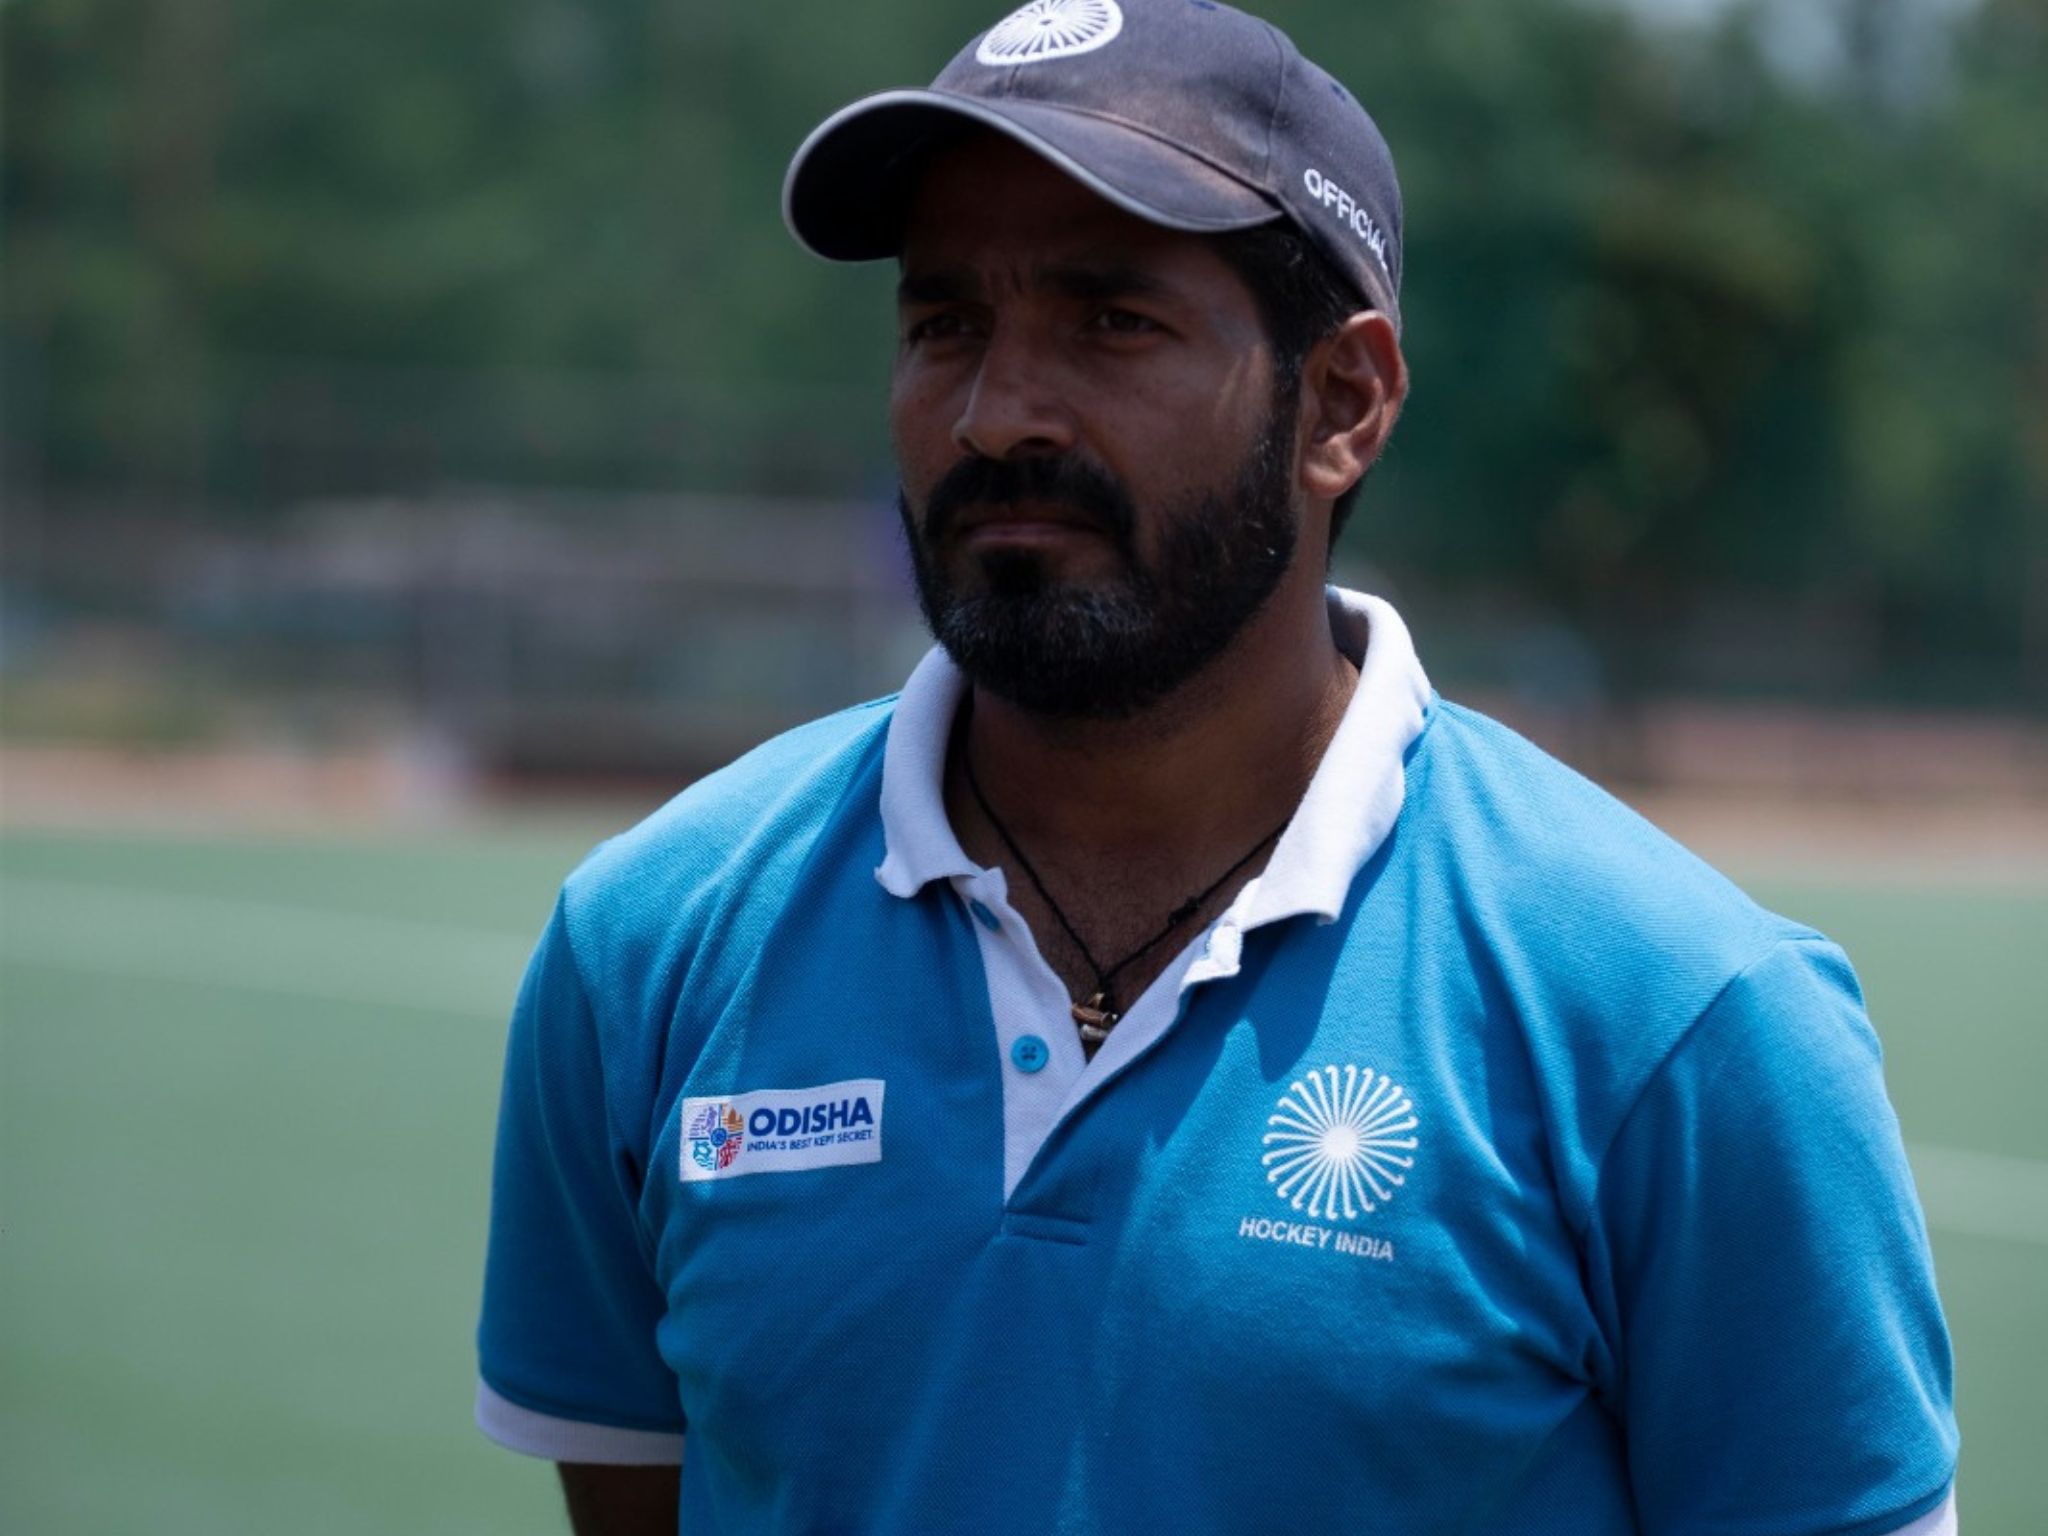 India has good chance of topping podium at Hero Asian Champions Trophy: Shivendra Singh